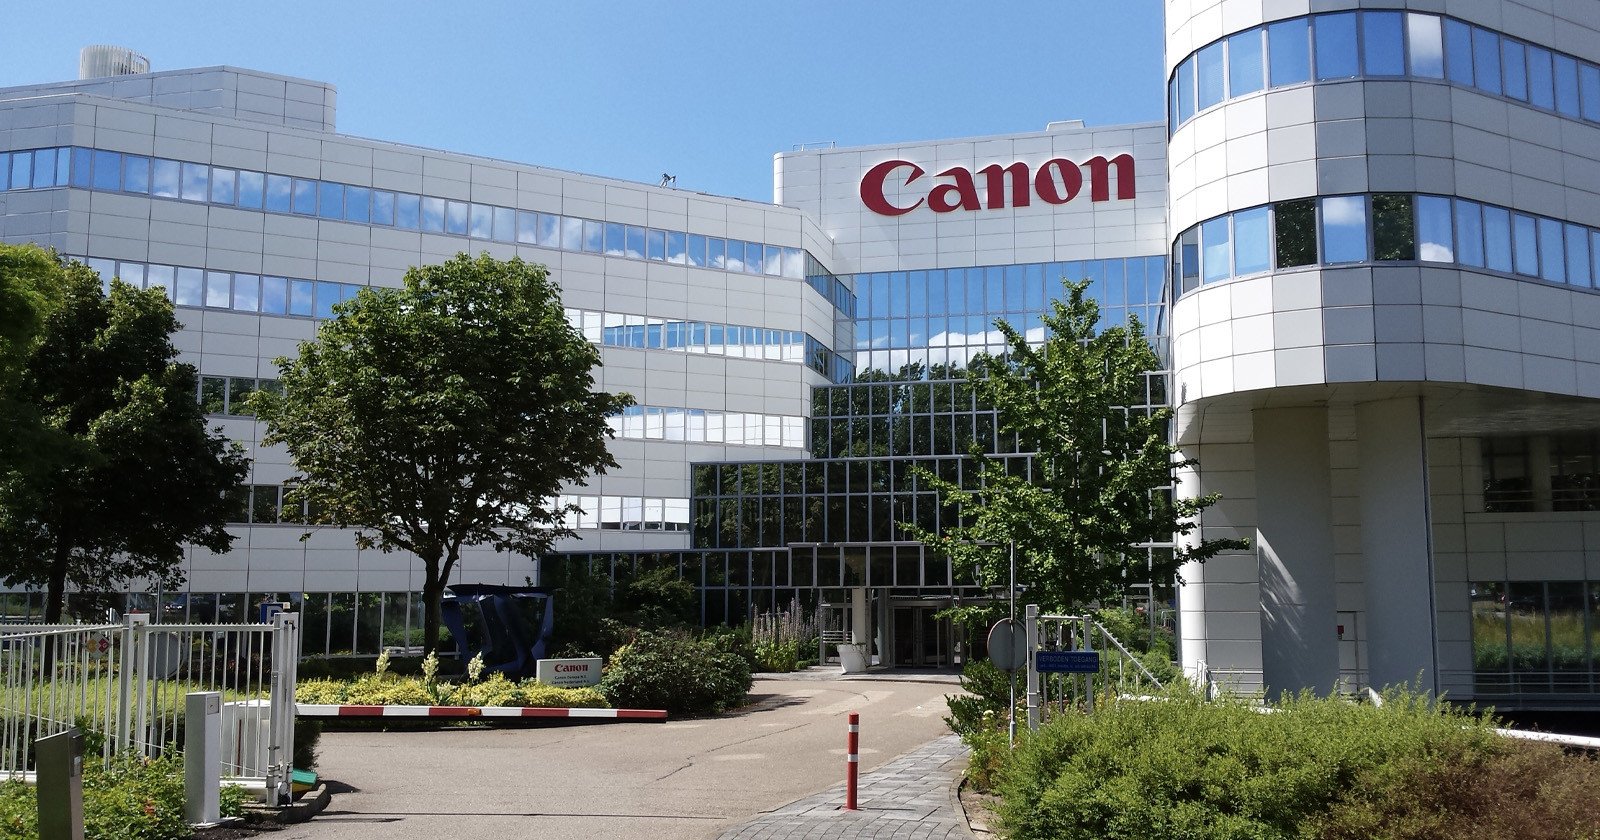  canon europe has stopped shipments russia 